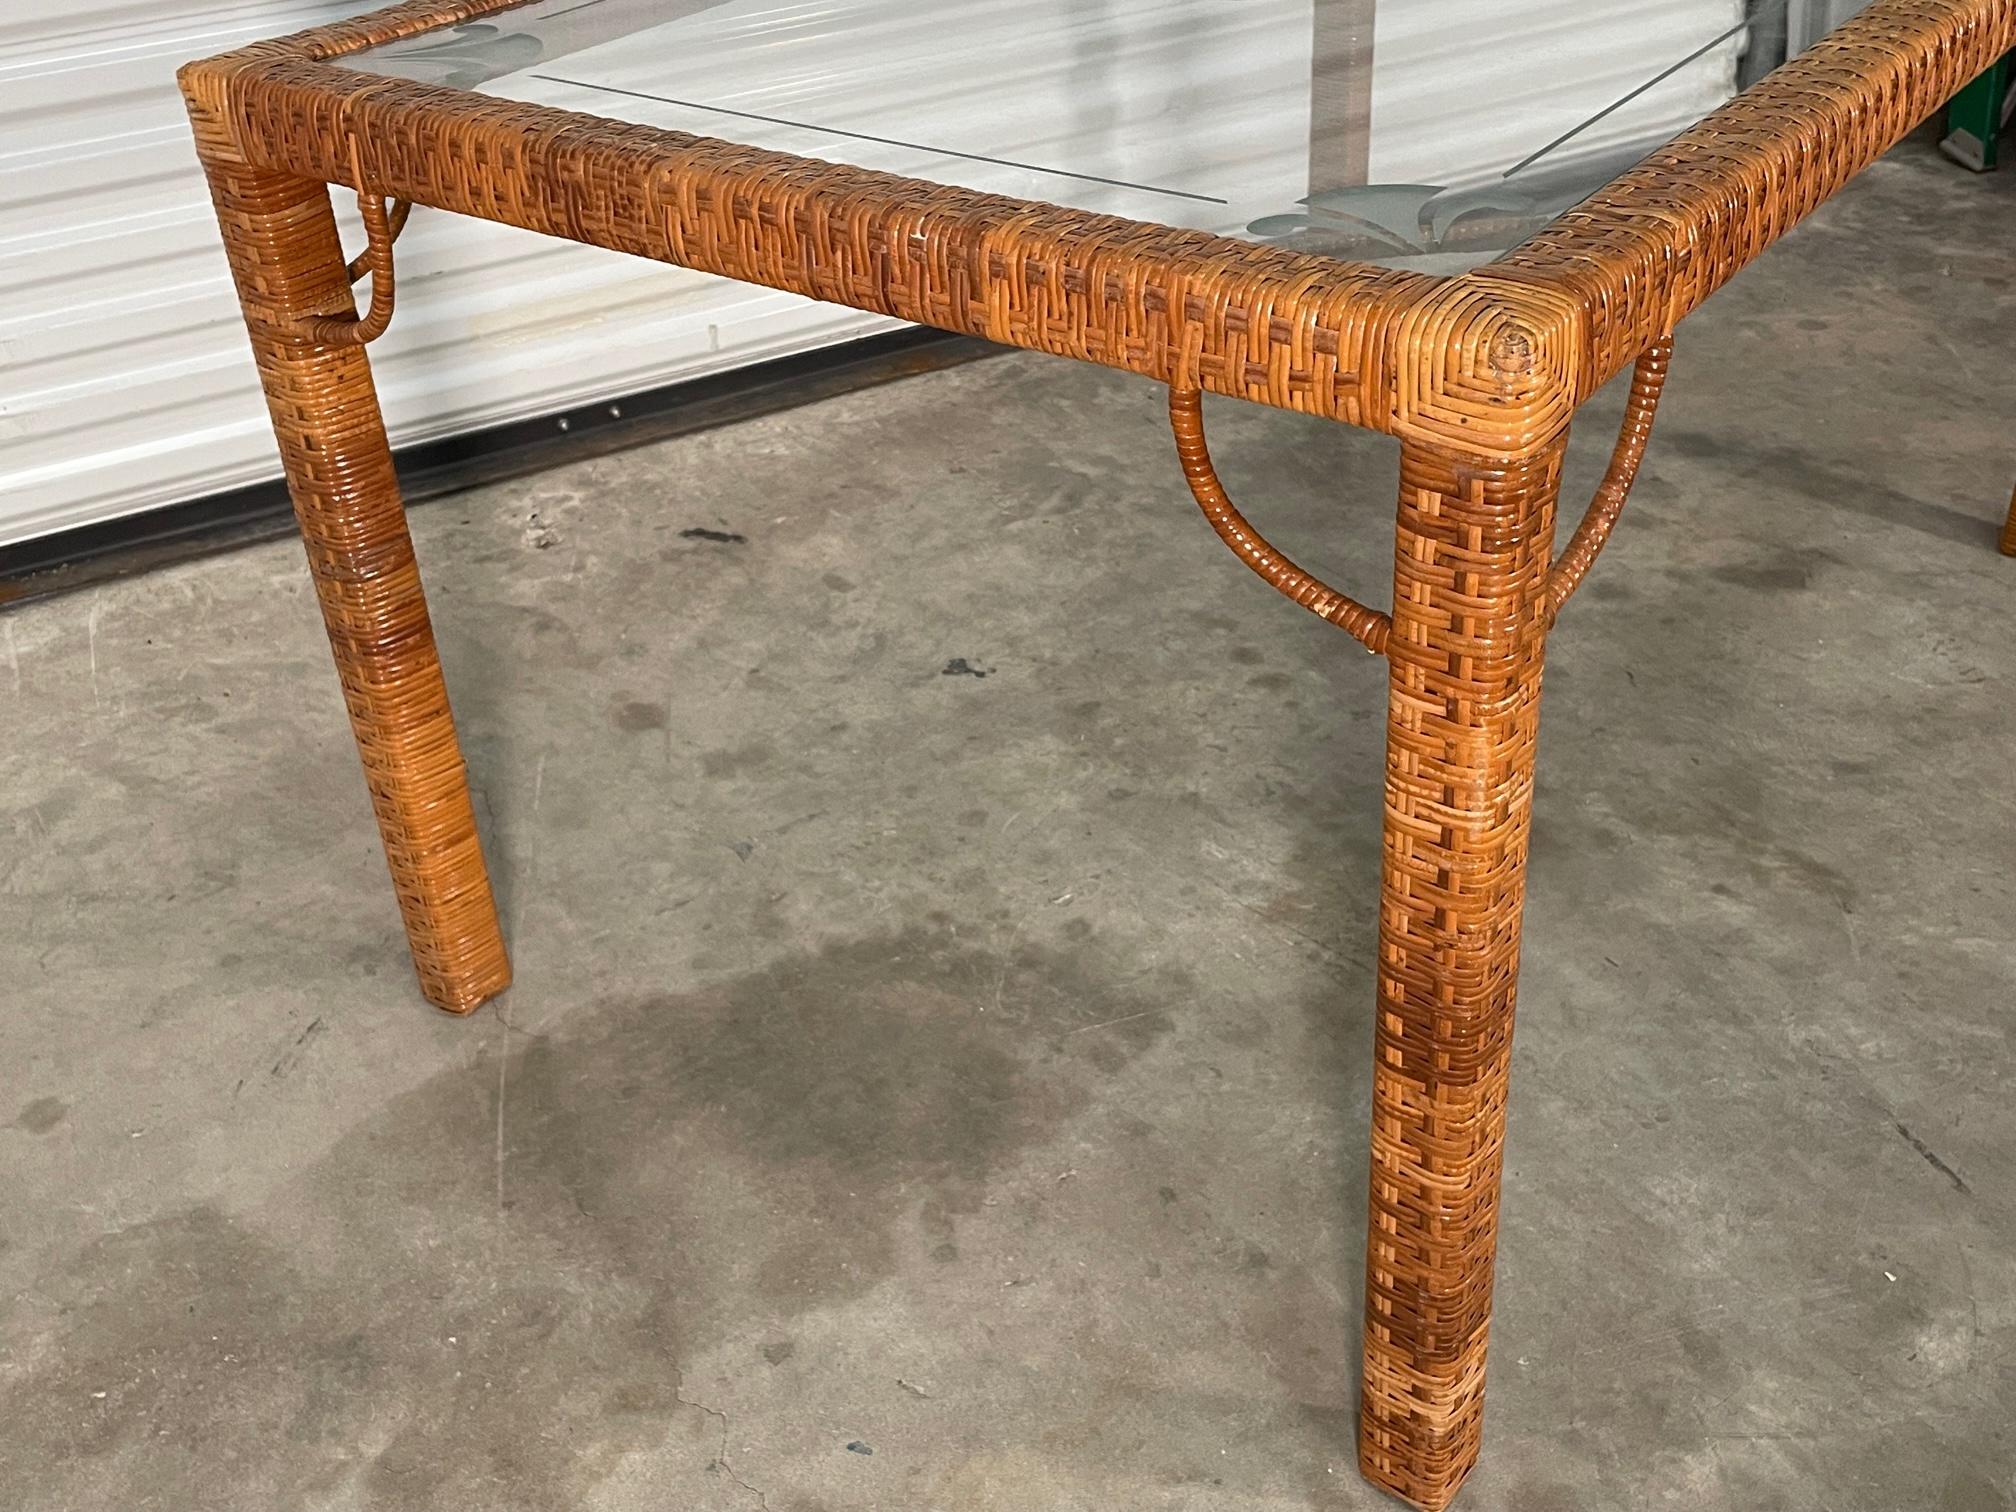 Wicker Wrapped Basketweave Dining Table In Good Condition For Sale In Jacksonville, FL